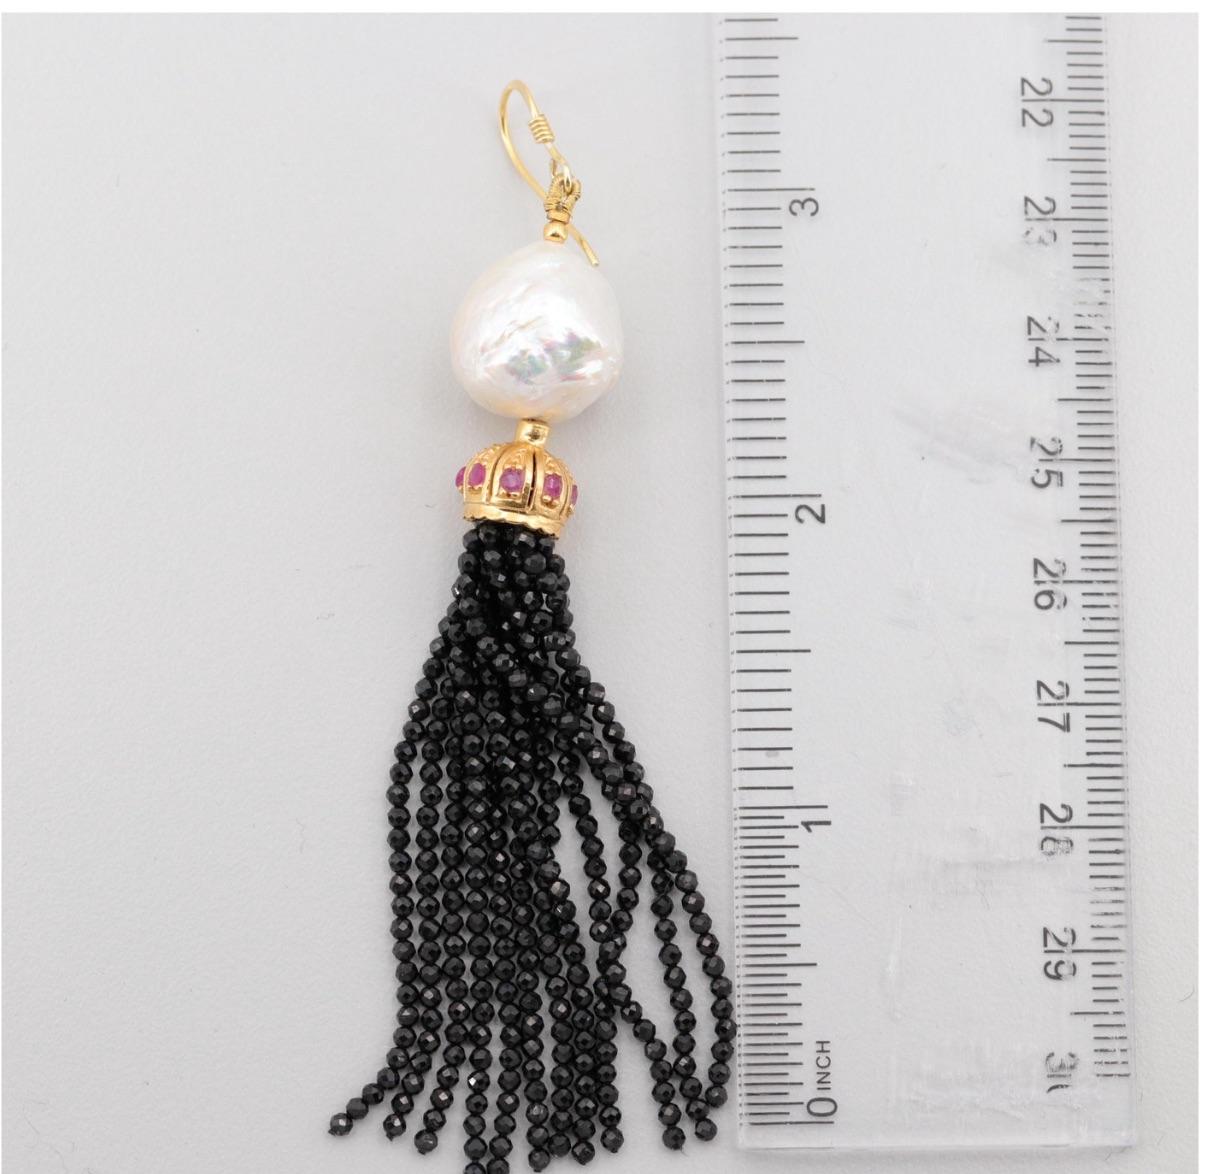 Gleaming Tassel Earrings Right on Trend for a Stylish Fashionista!

Gold on Sterling Silver- Good White Baroque Pearl 14 mm from the Orient,
Side Stones-Round Ruby, with Lustrous Onyx Tassel Beads, wire hook earring closure.   measures:  3 1/2